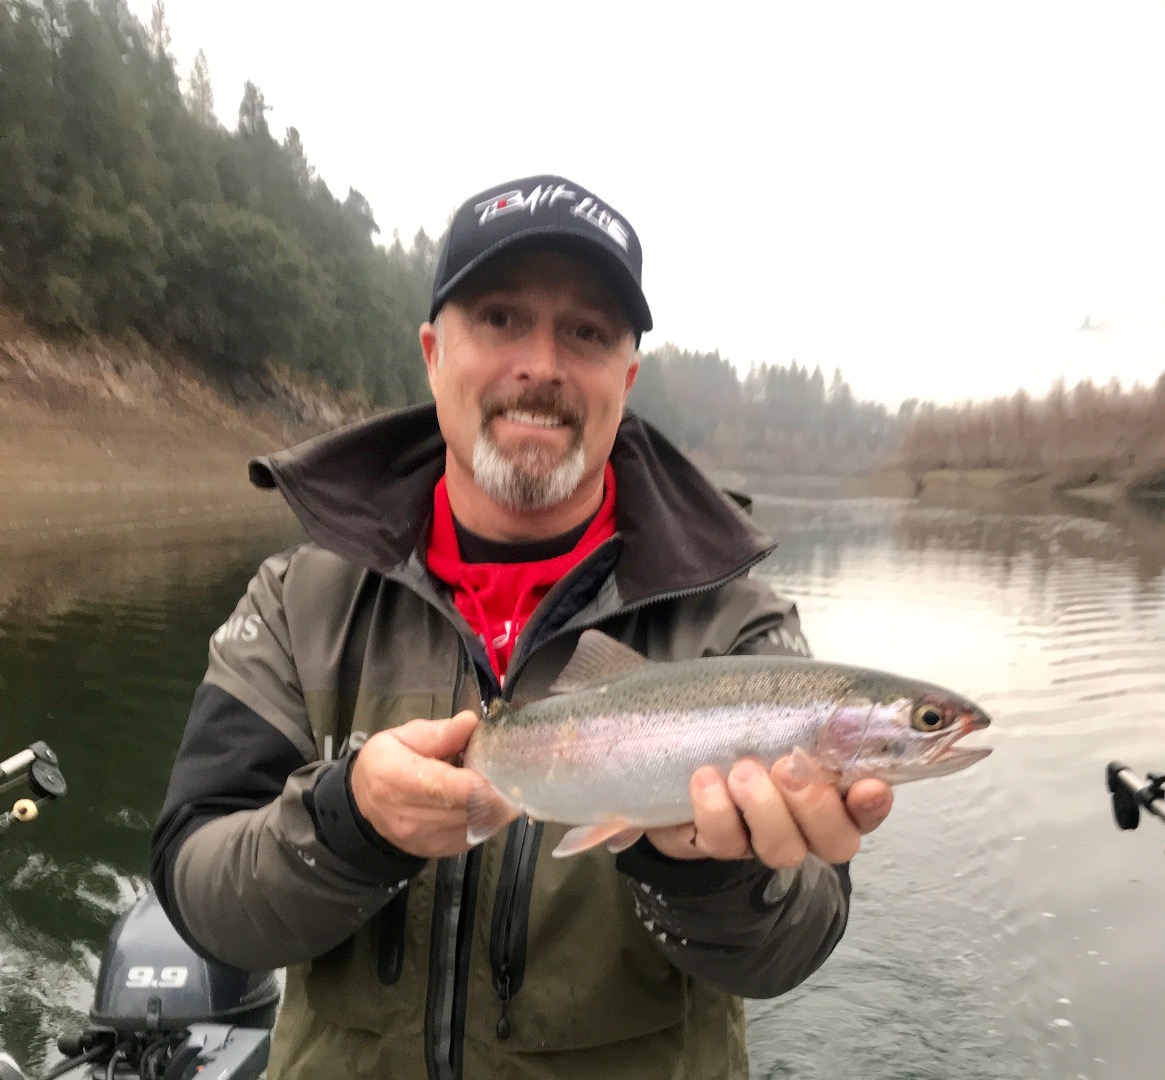 Winter trout fishing on Shasta Lake continues!